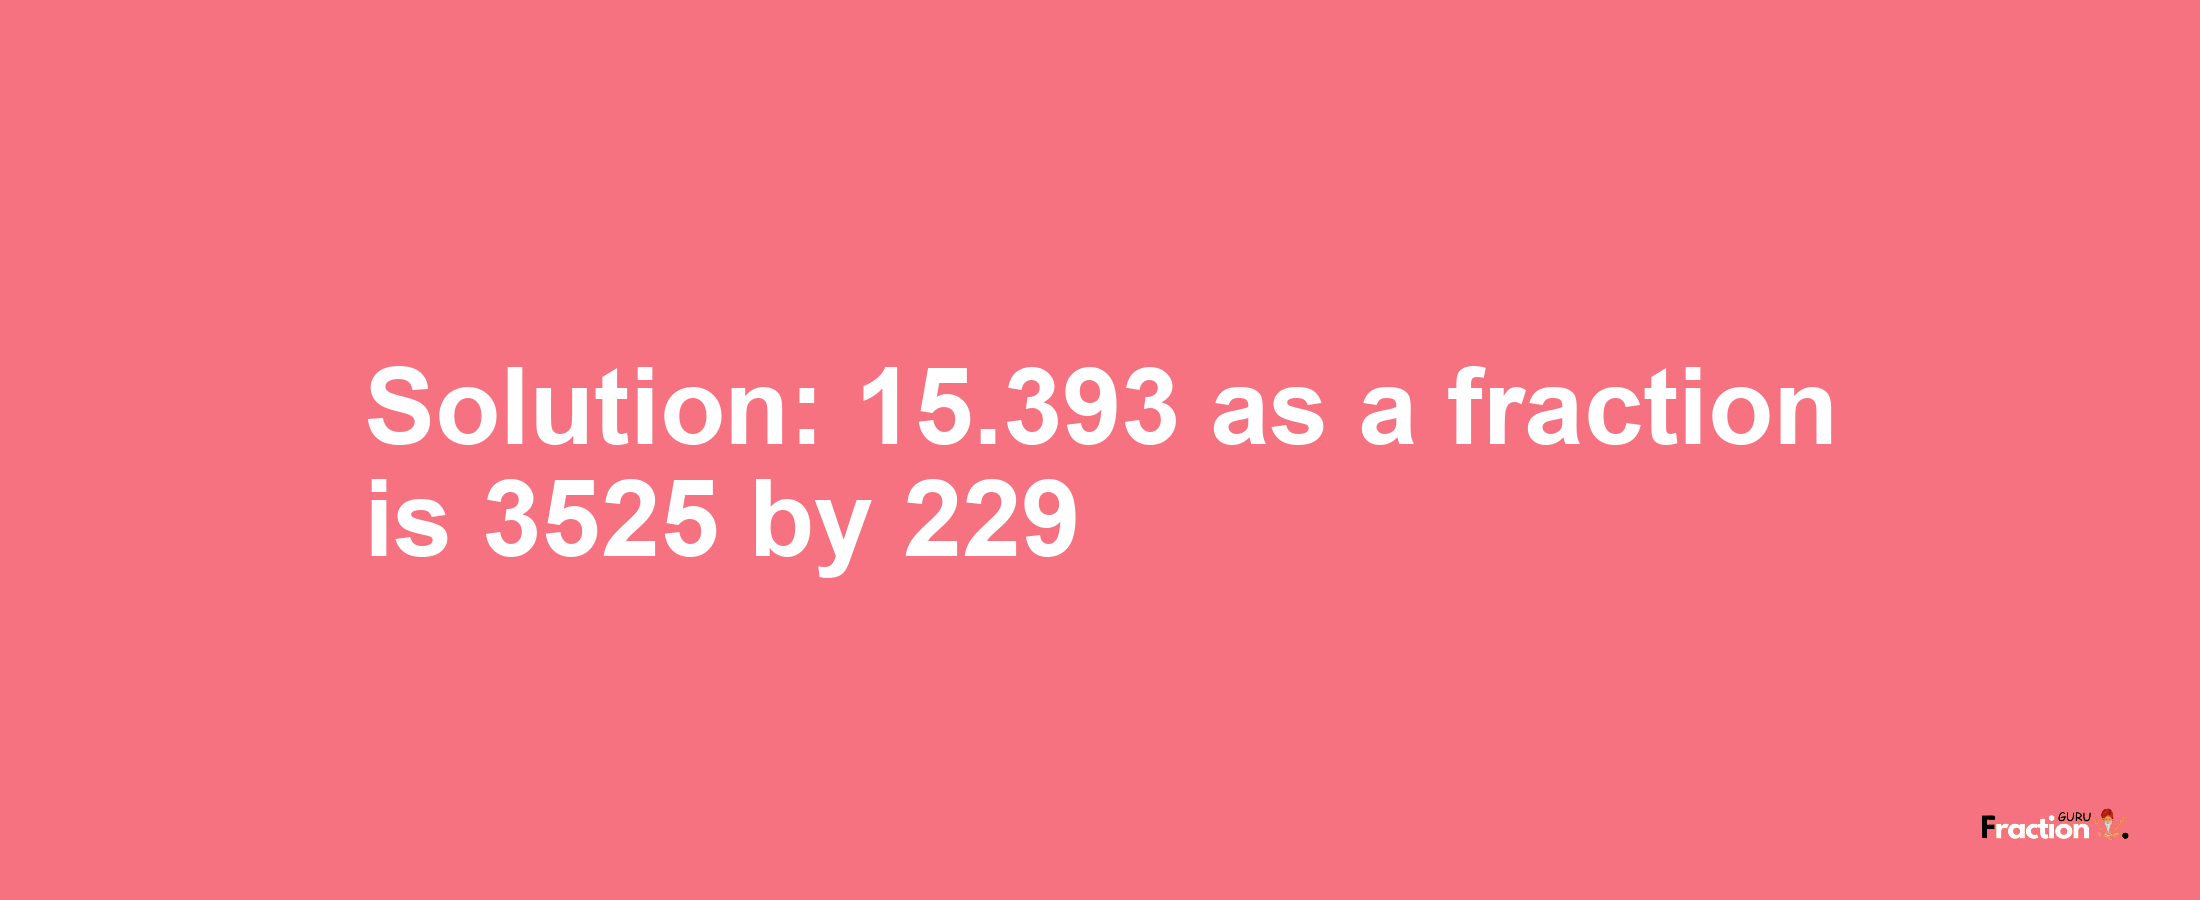 Solution:15.393 as a fraction is 3525/229